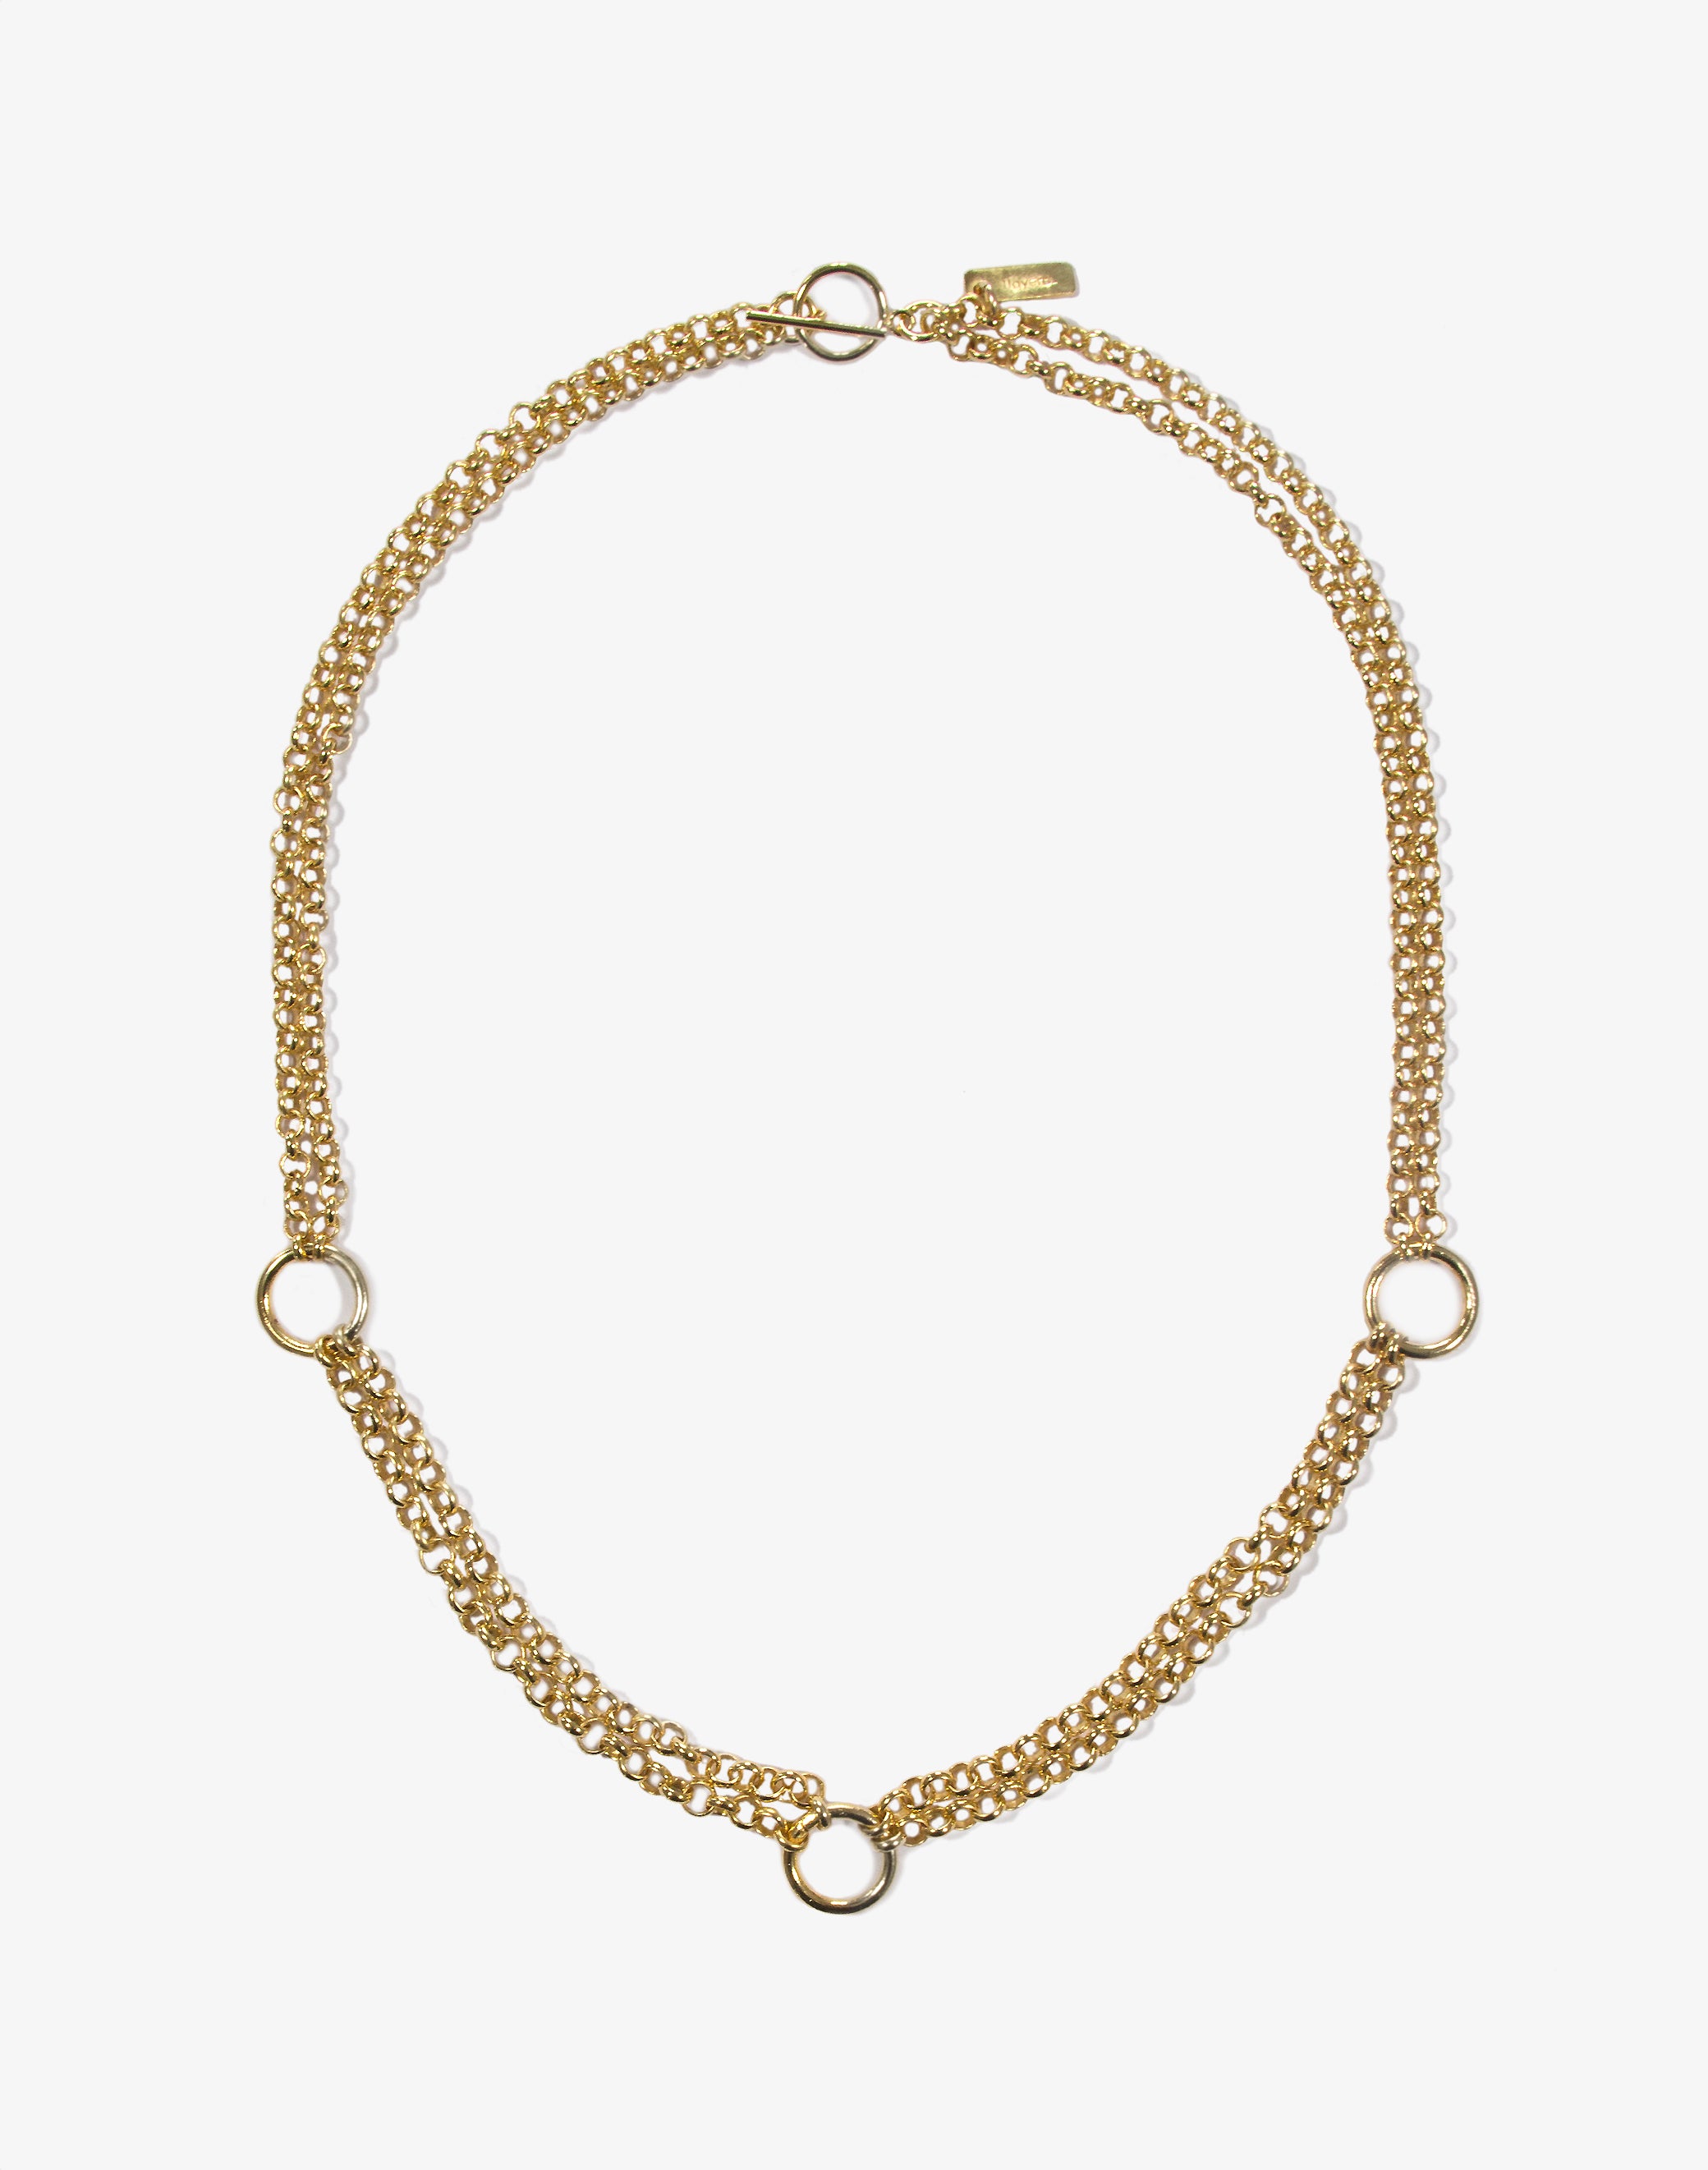 llayers Gold men women minimal long chain choker necklace with rings Hancrafted in Brooklyn New York